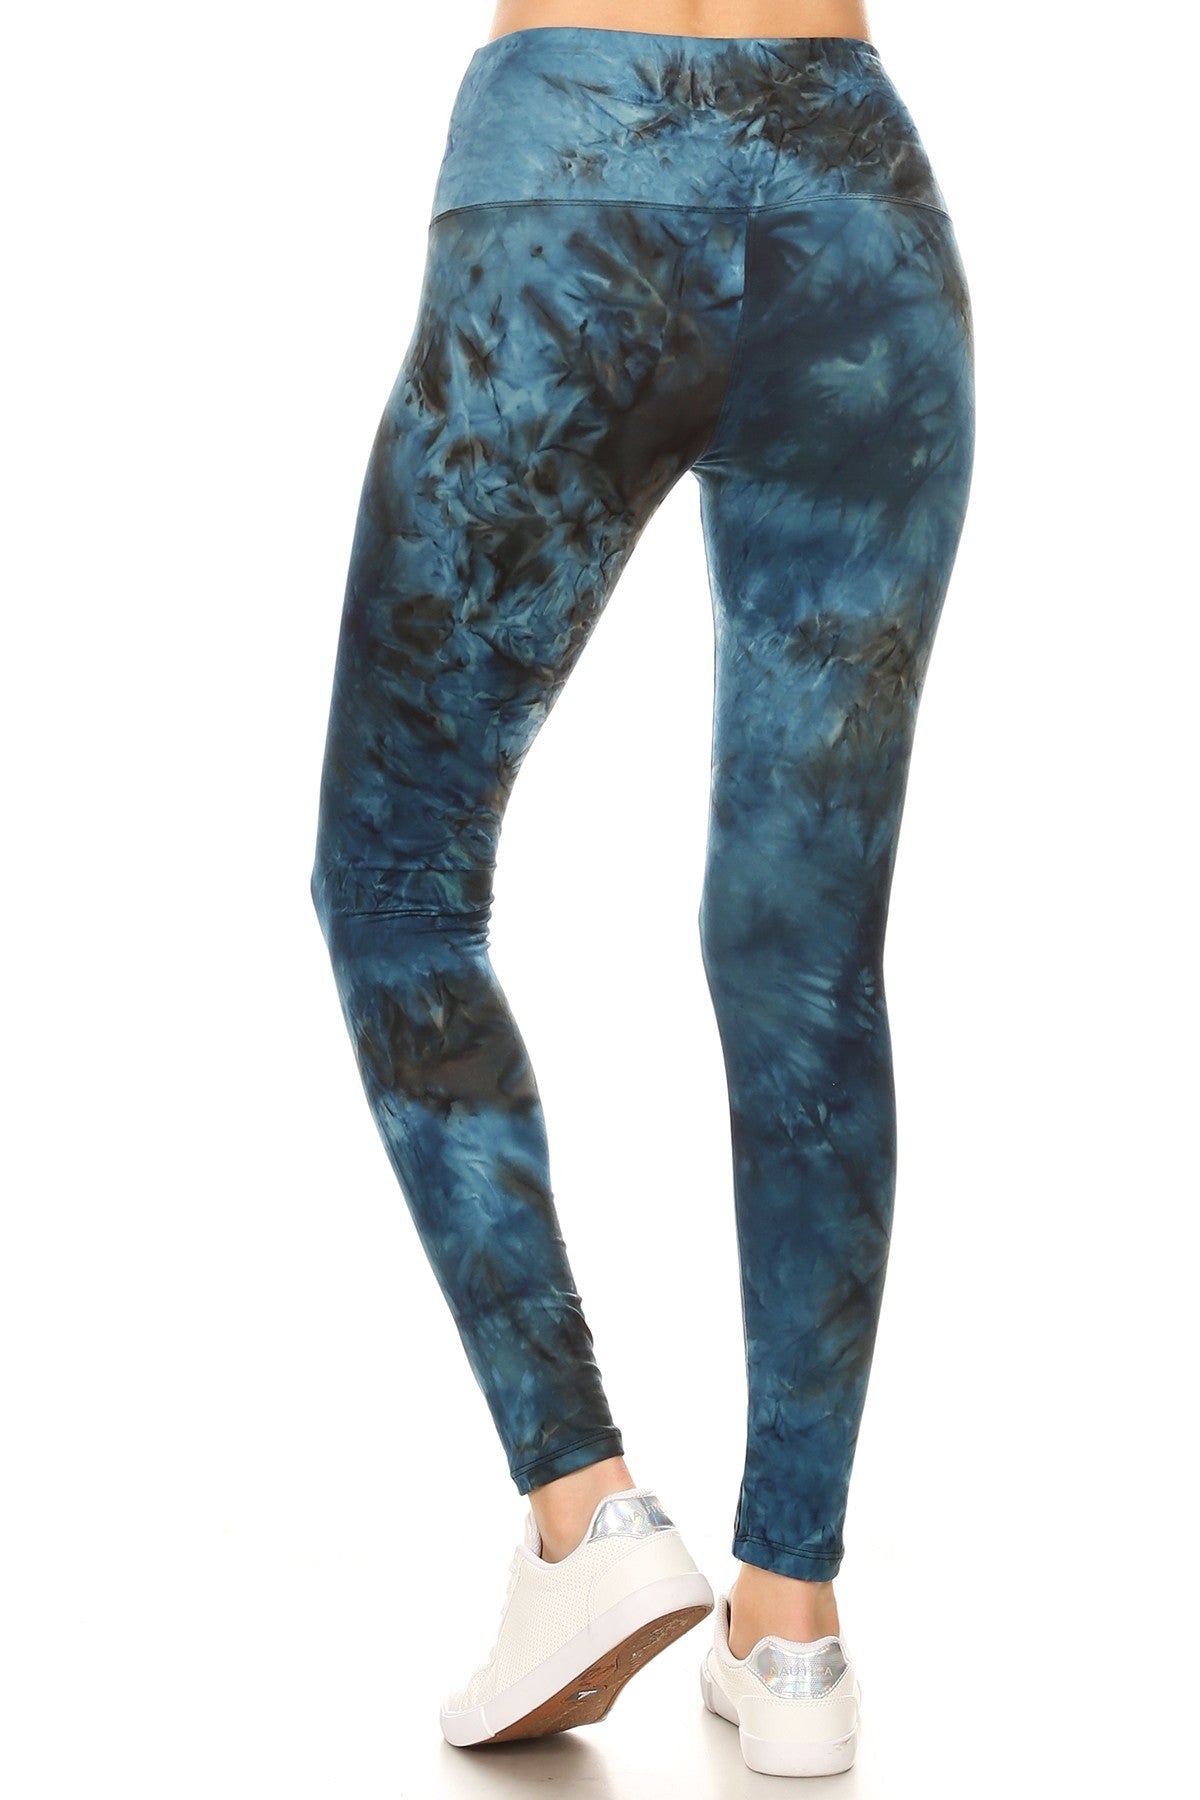 5-inch Long Yoga Style Banded Lined Tie Dye Printed Knit Legging With High Waist-[Adult]-[Female]-Multi-Blue Zone Planet